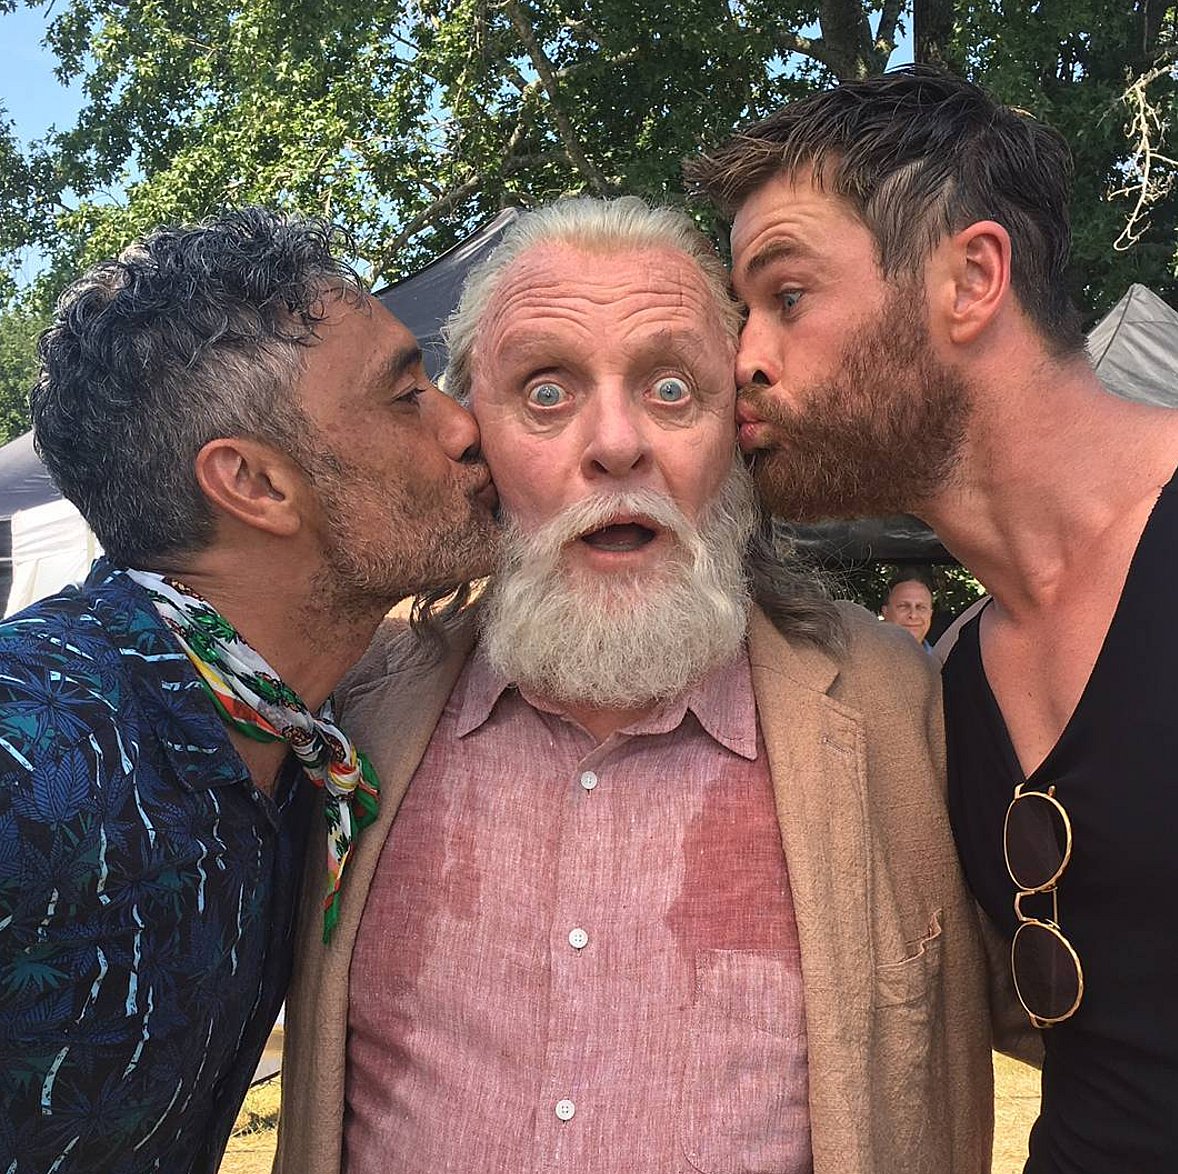 RT @supergayscripts: please consider this photo from the set of Thor https://t.co/VXUoJb8Zuo